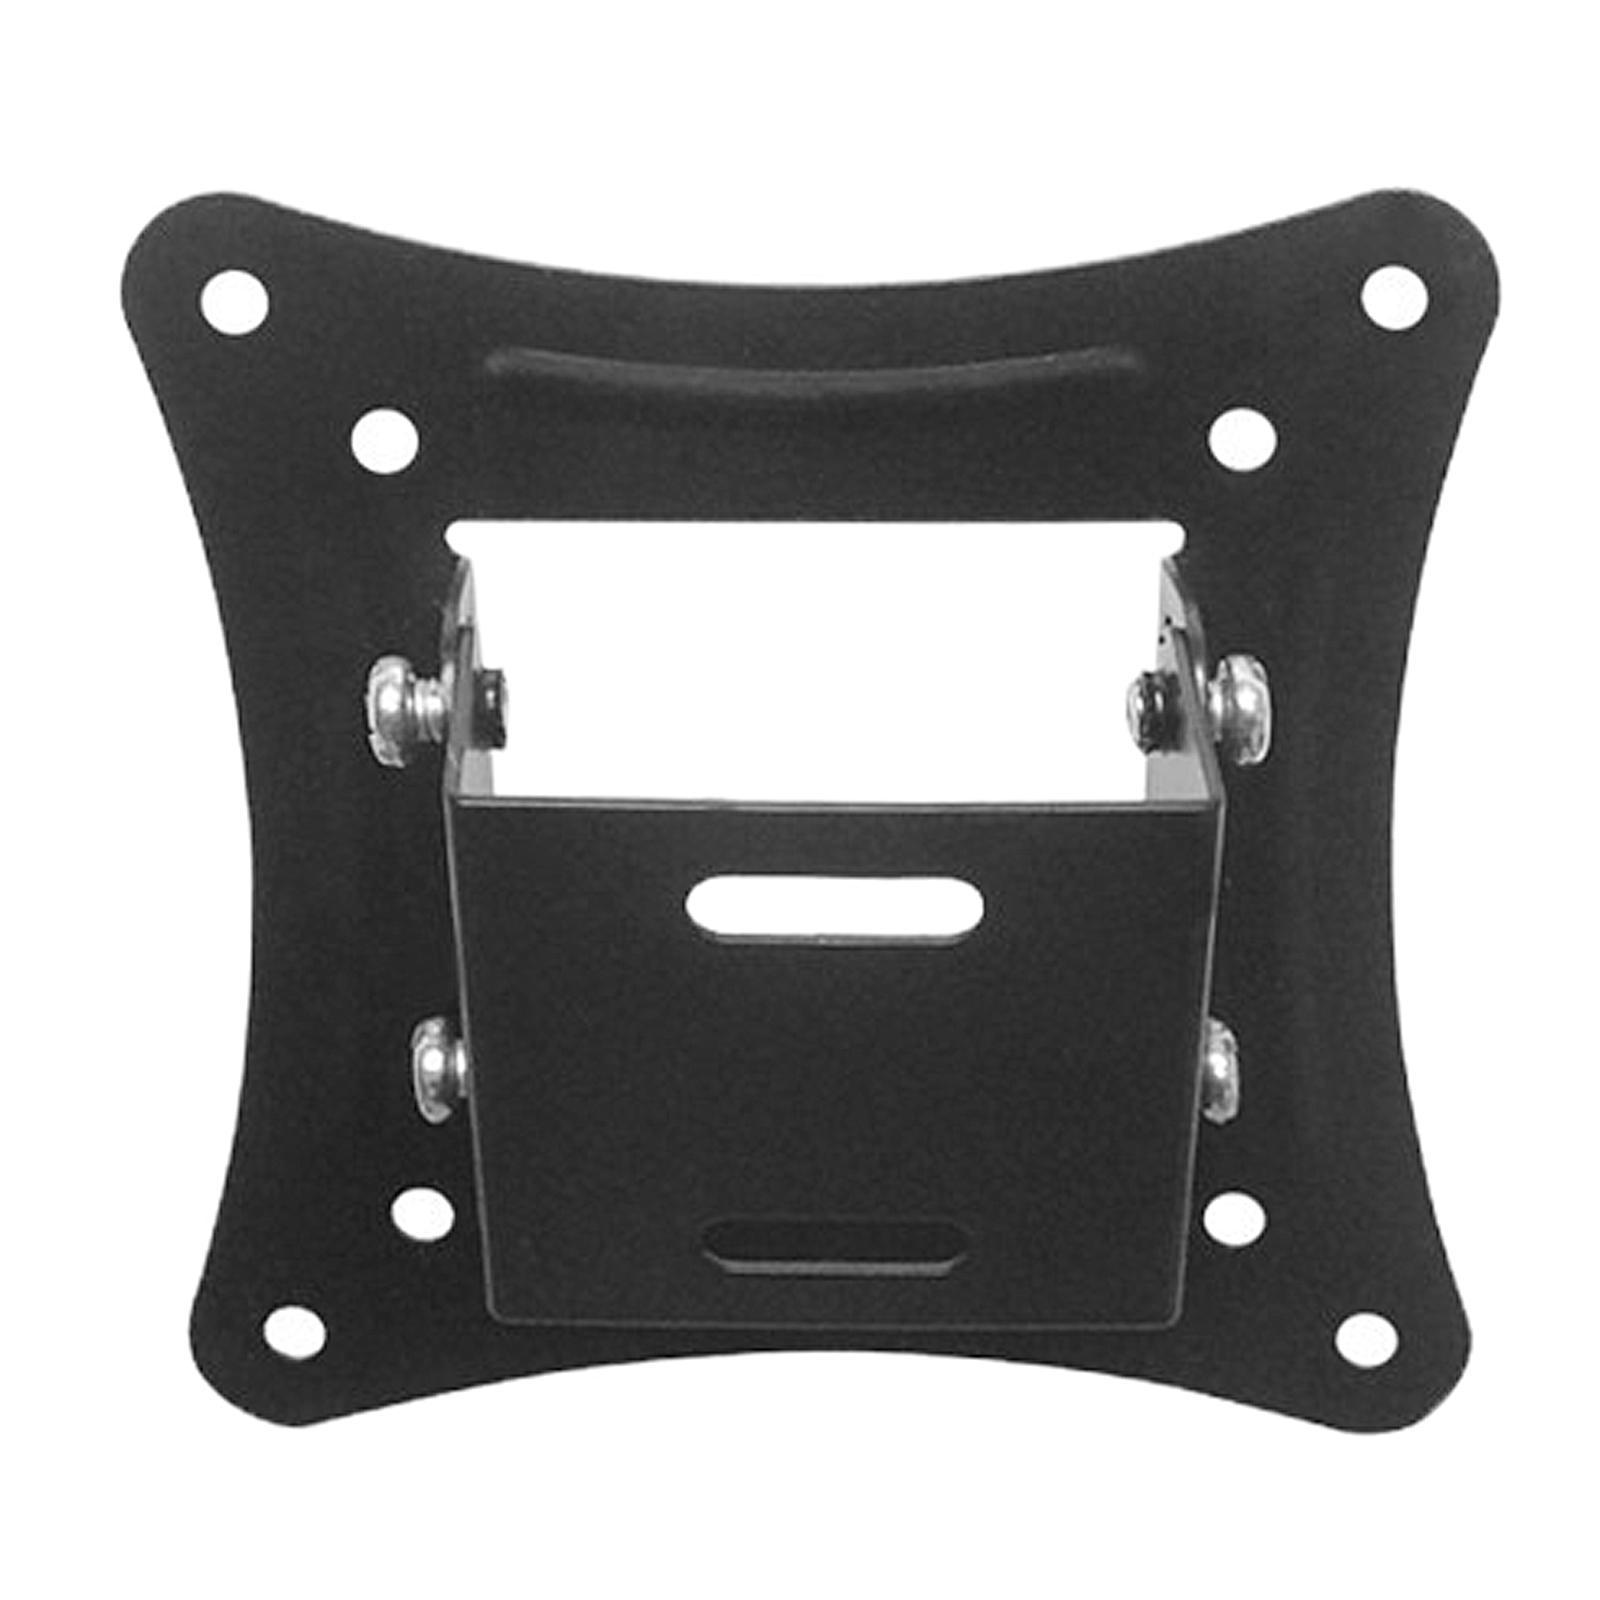 TV Wall Mounted Bracket Fixed for 14 to 24 inch Screens TV Frame